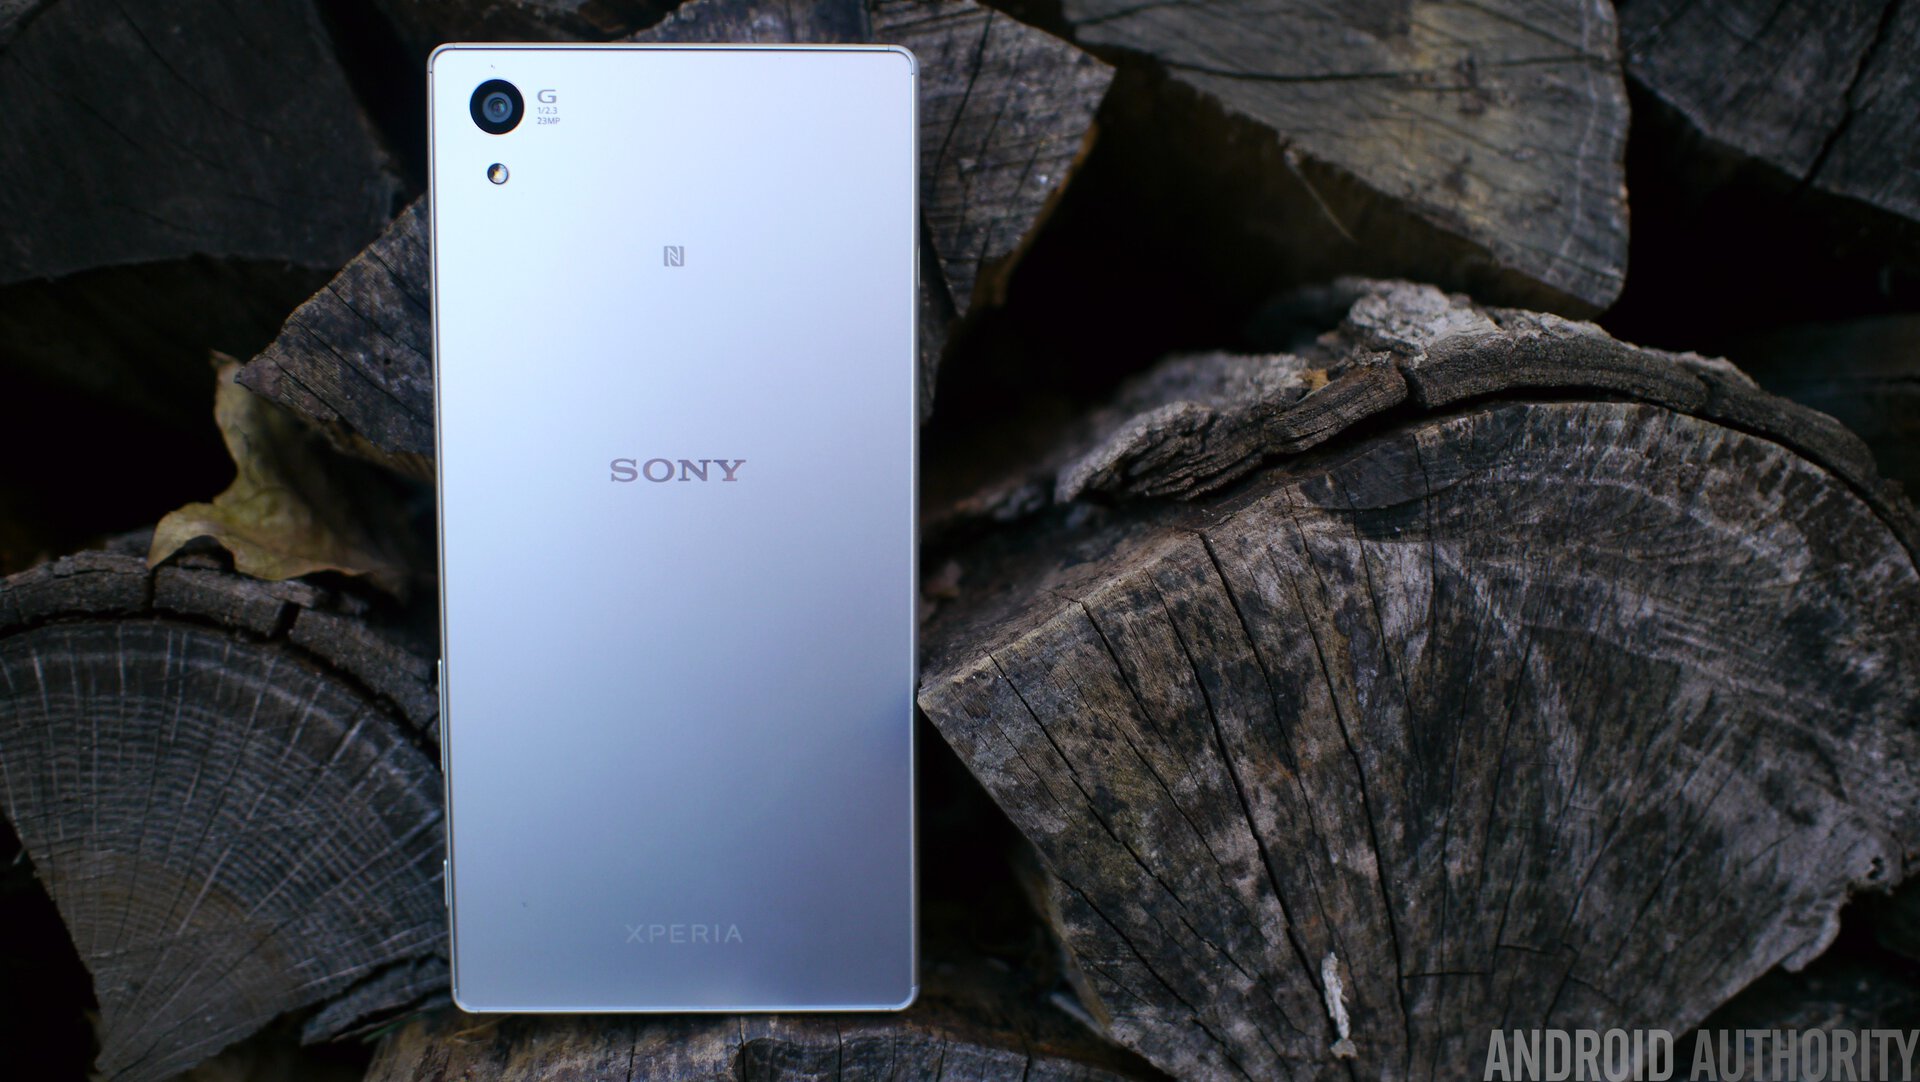 Sony Xperia Z5 and Z5 now available in